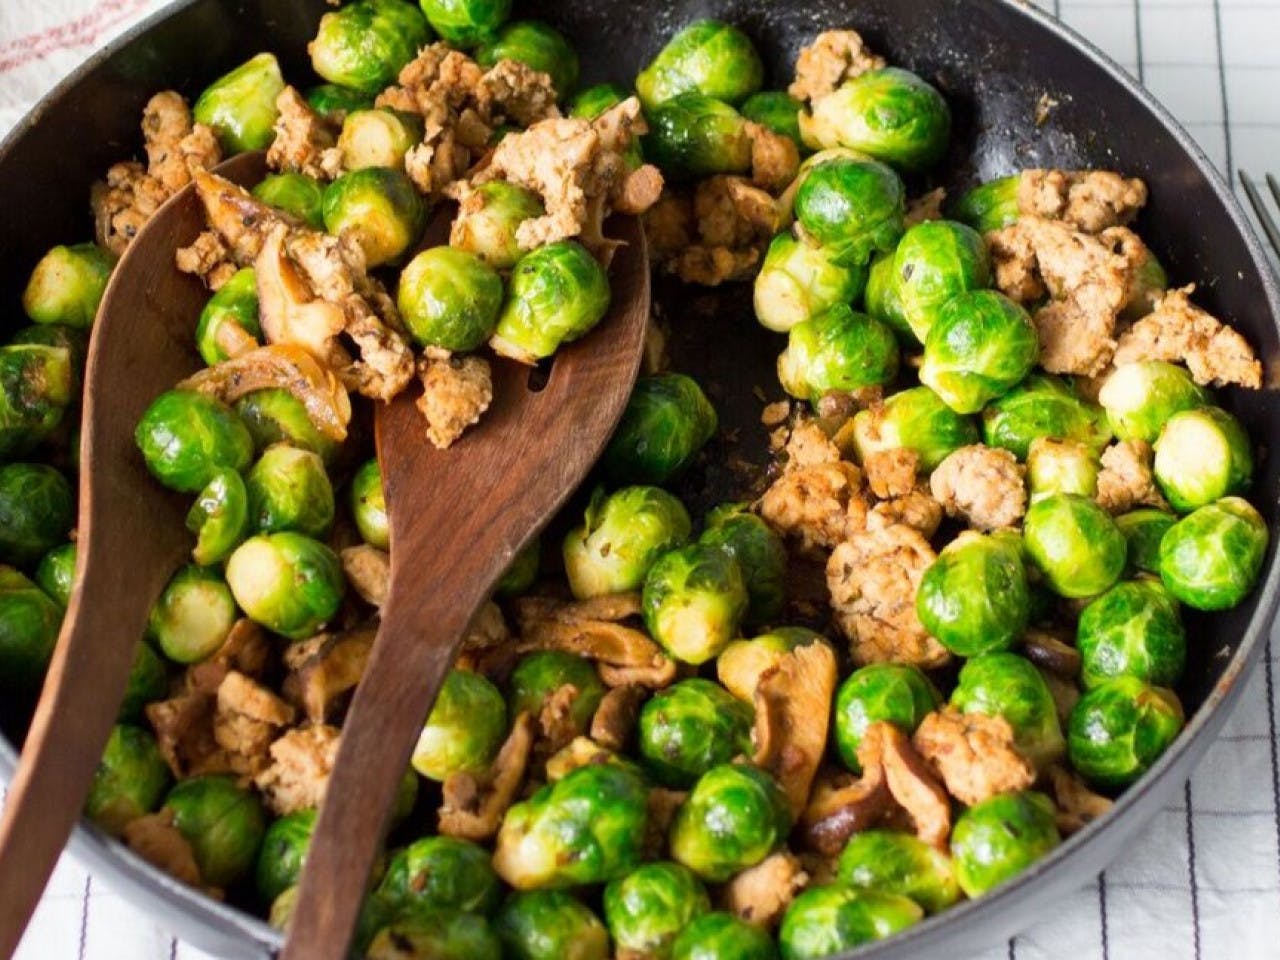 Fast Brussels sprouts dish